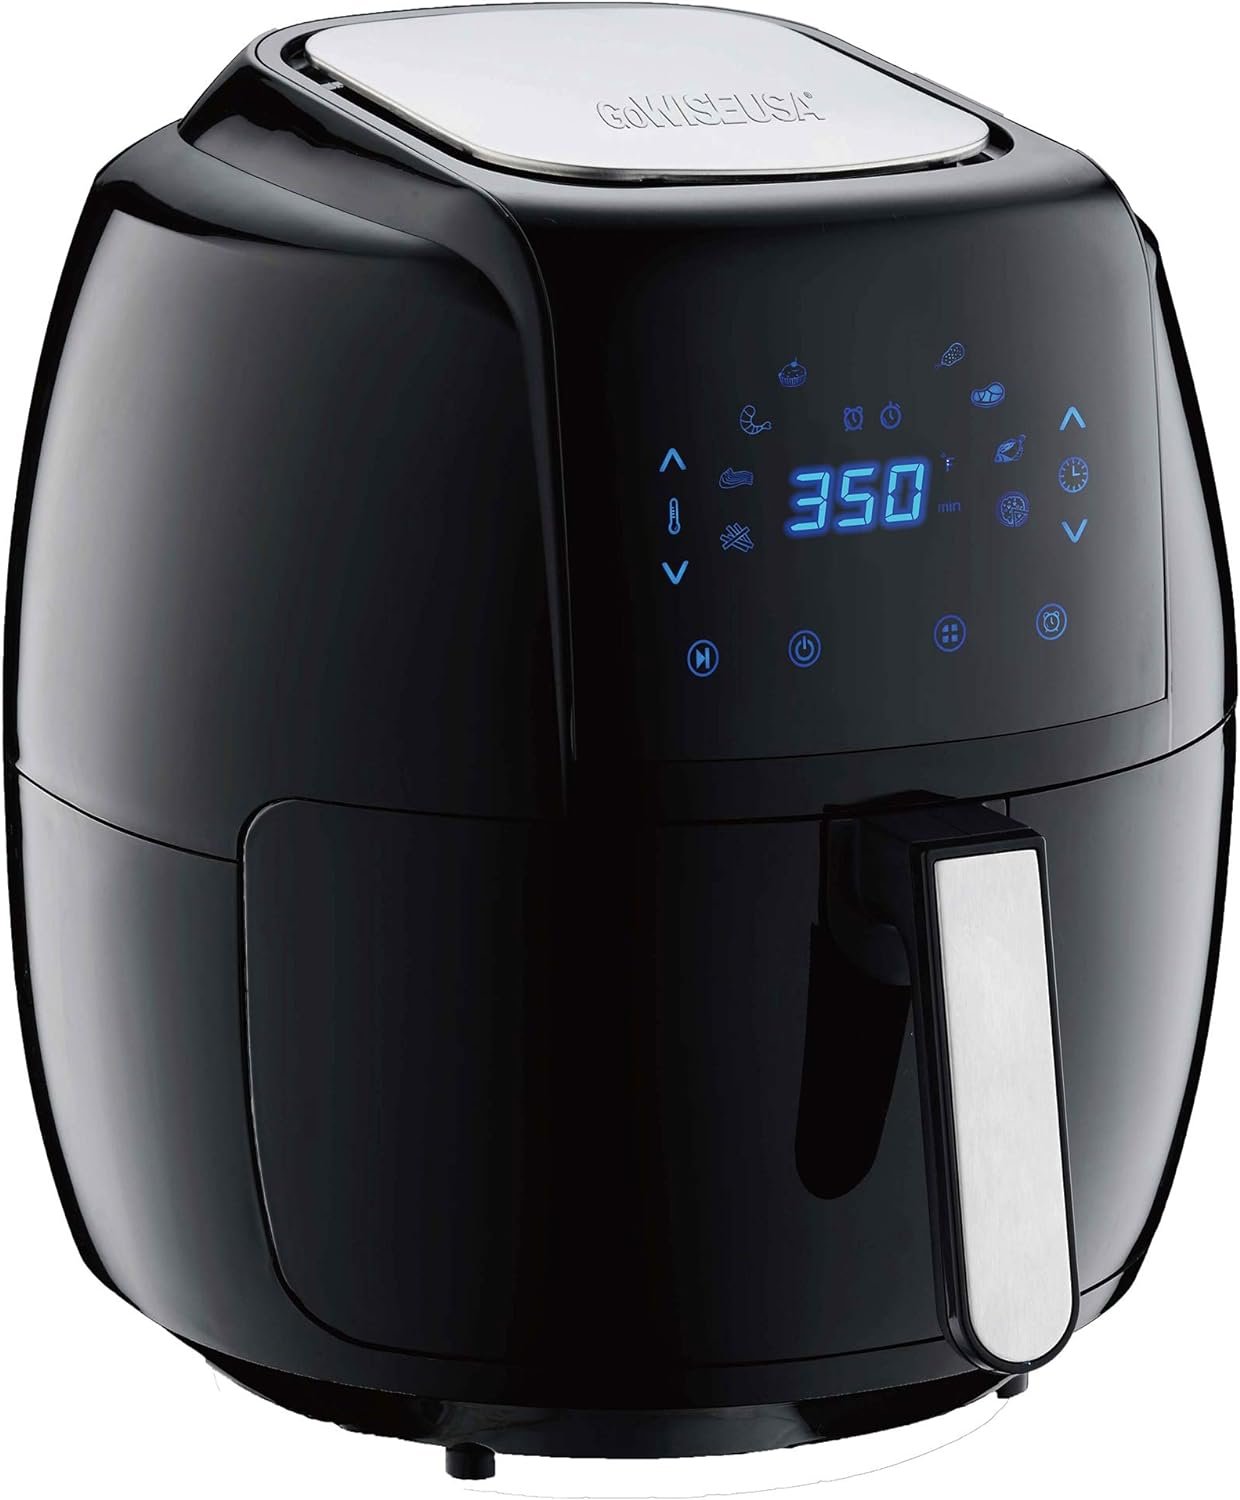 GoWISE USA 8-in-1 Digital Air Fryer with Recipe Book, 7.0-Qt, Black